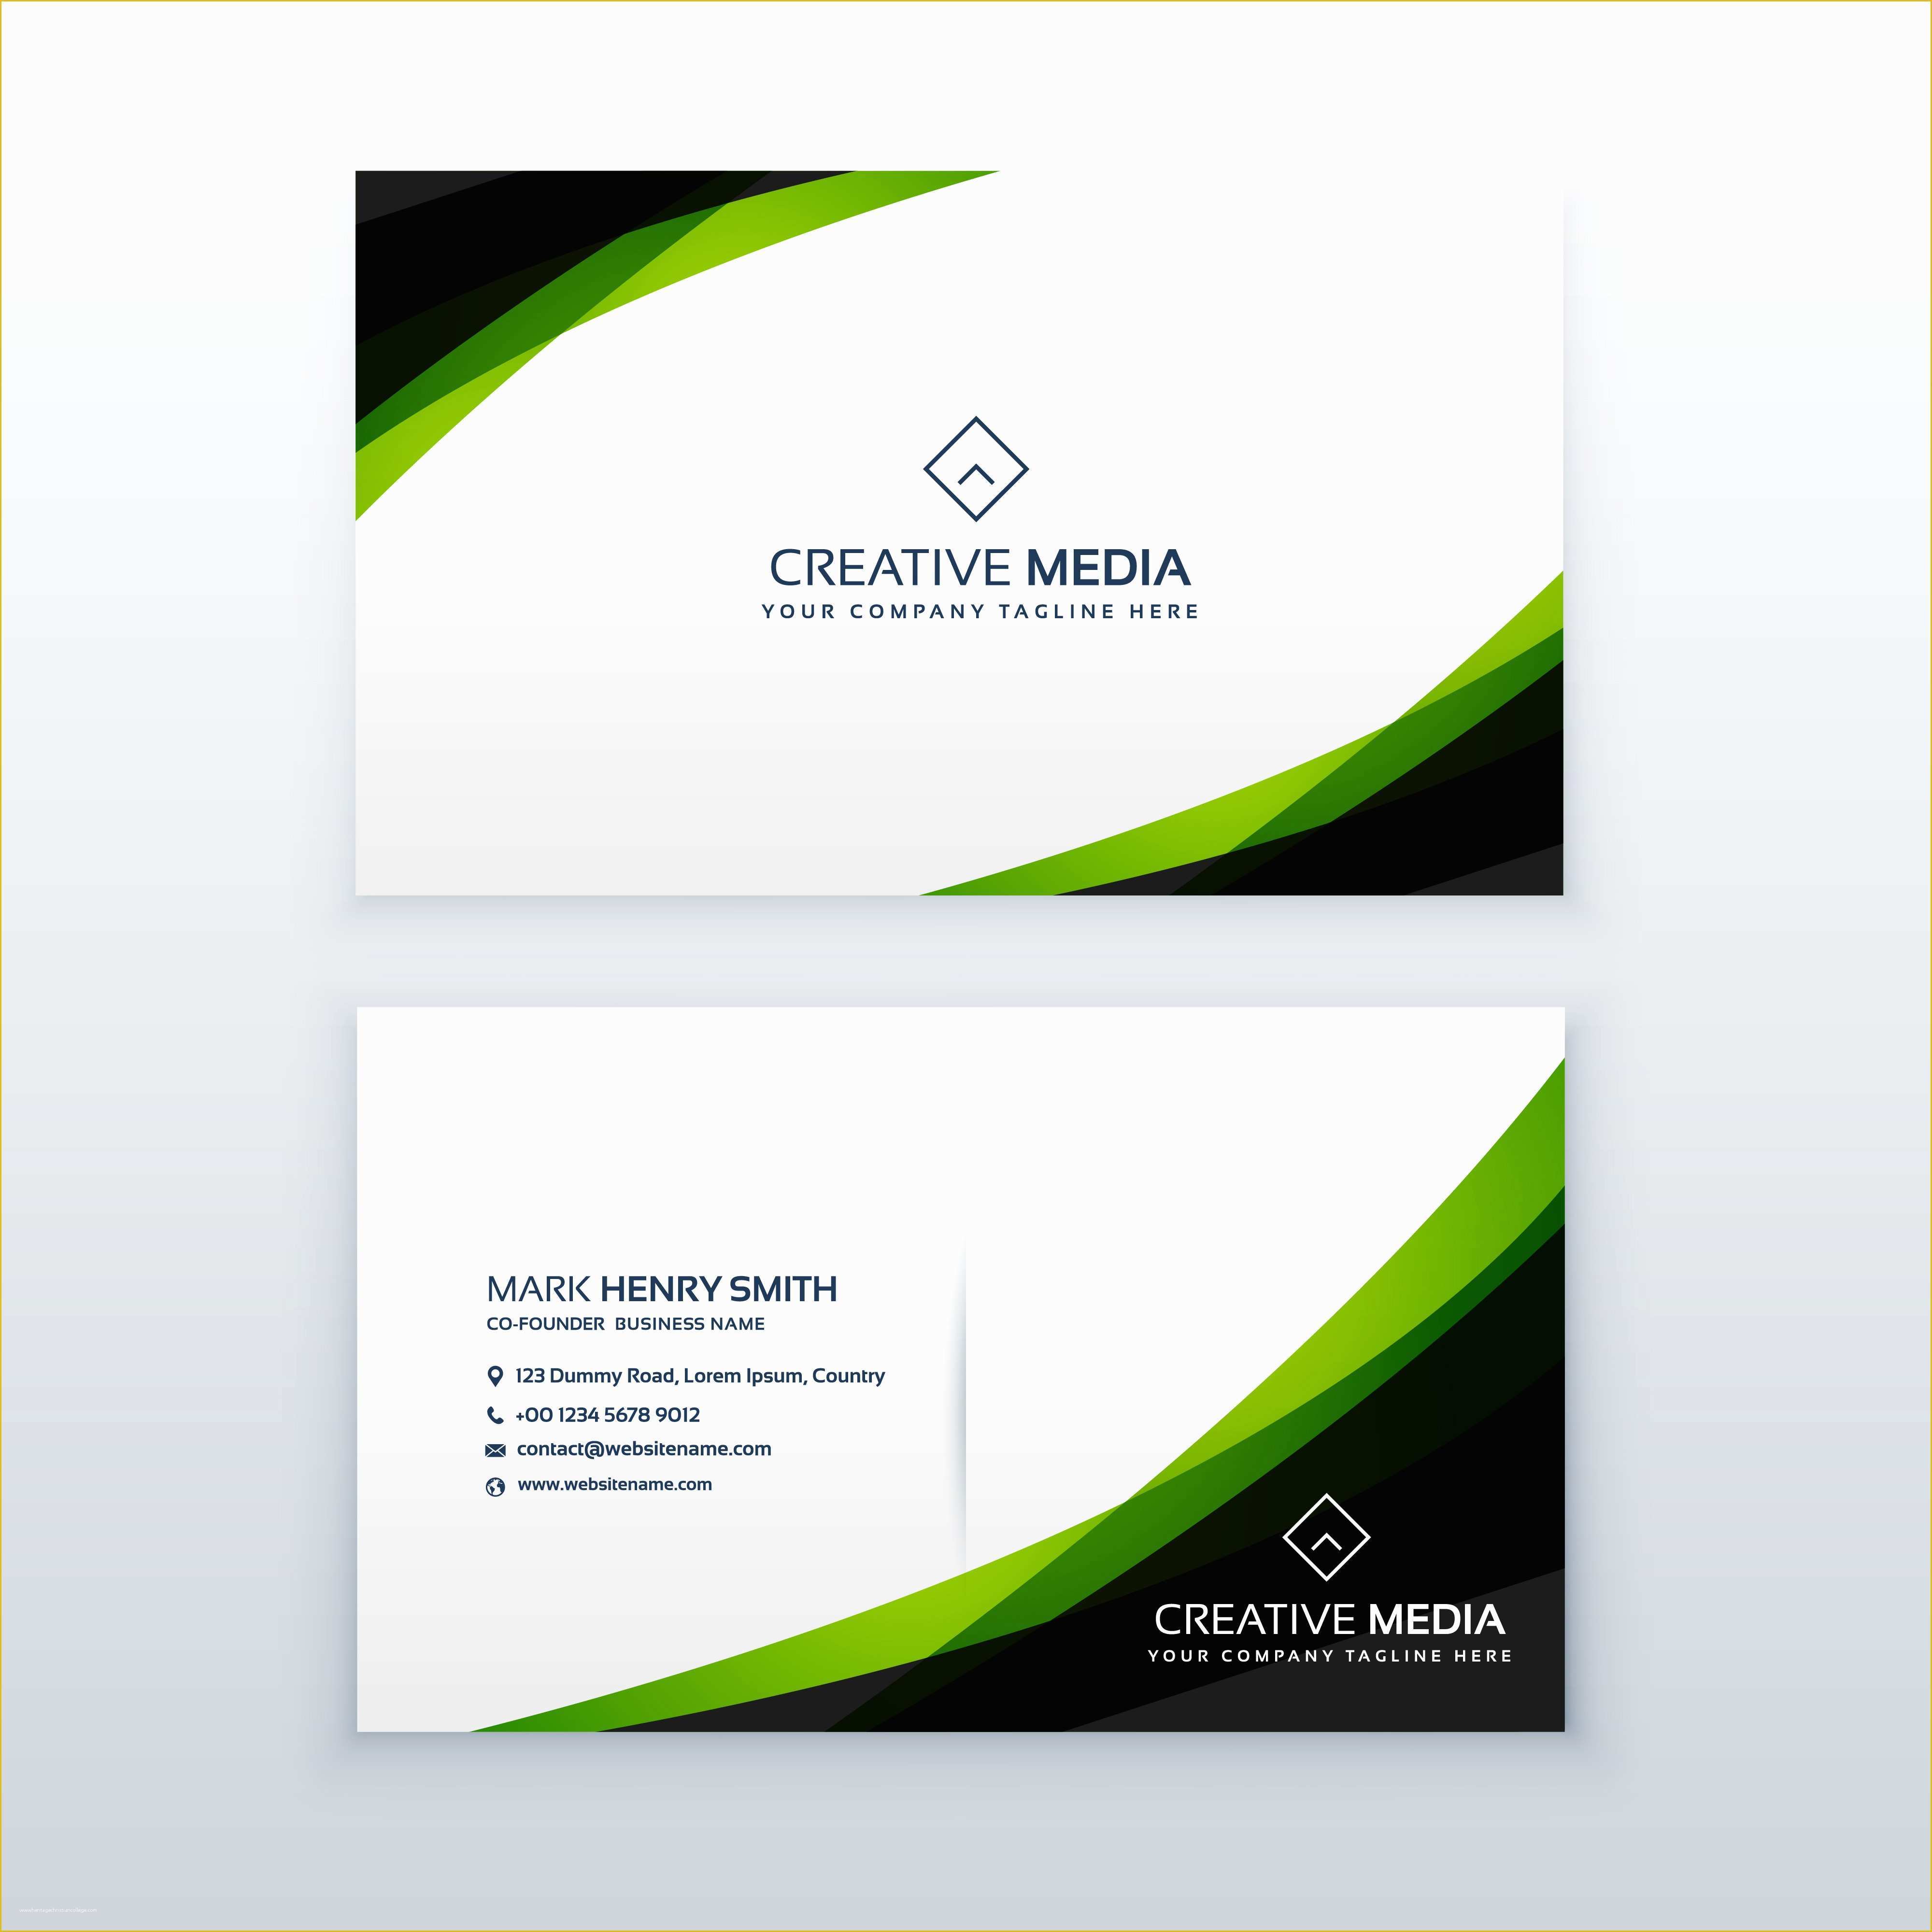 Free Business Card Design Templates Of Clean Simple Green Business Card Design Template